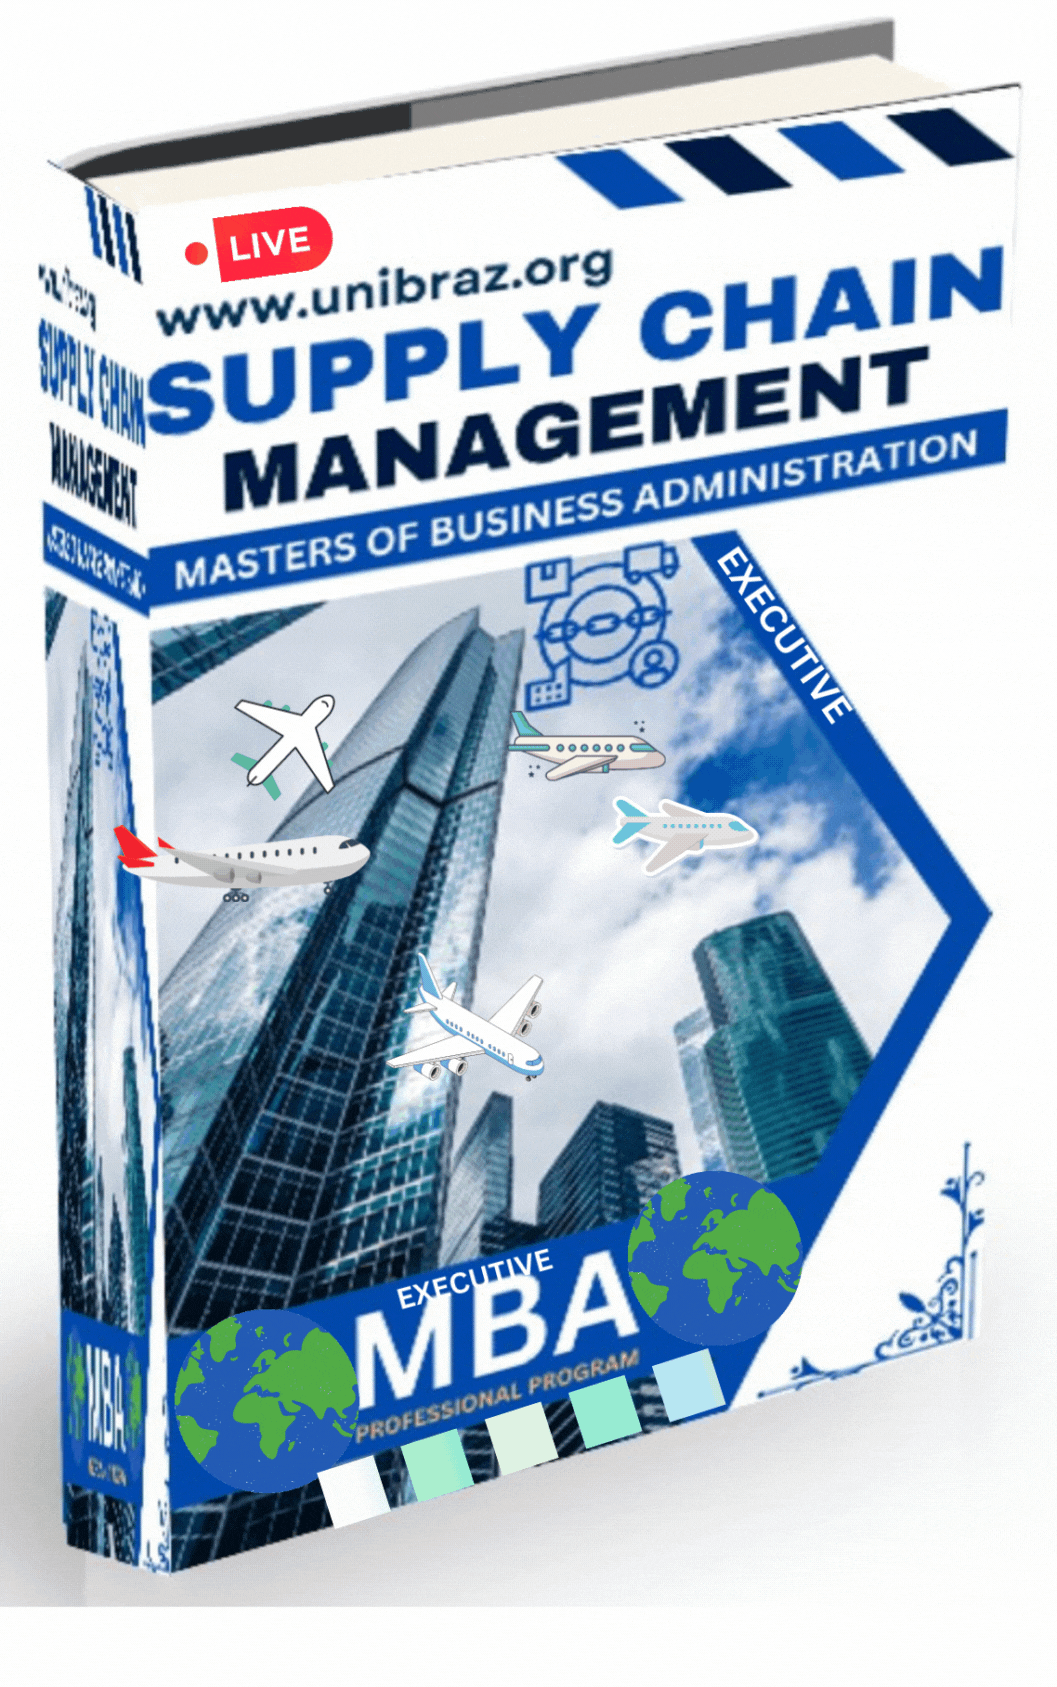 EXECUTIVE MASTERS OF BUSINESS ADMINISTRATION (EXECUTIVE MBA) – SUPPLY CHAIN MANAGEMENT